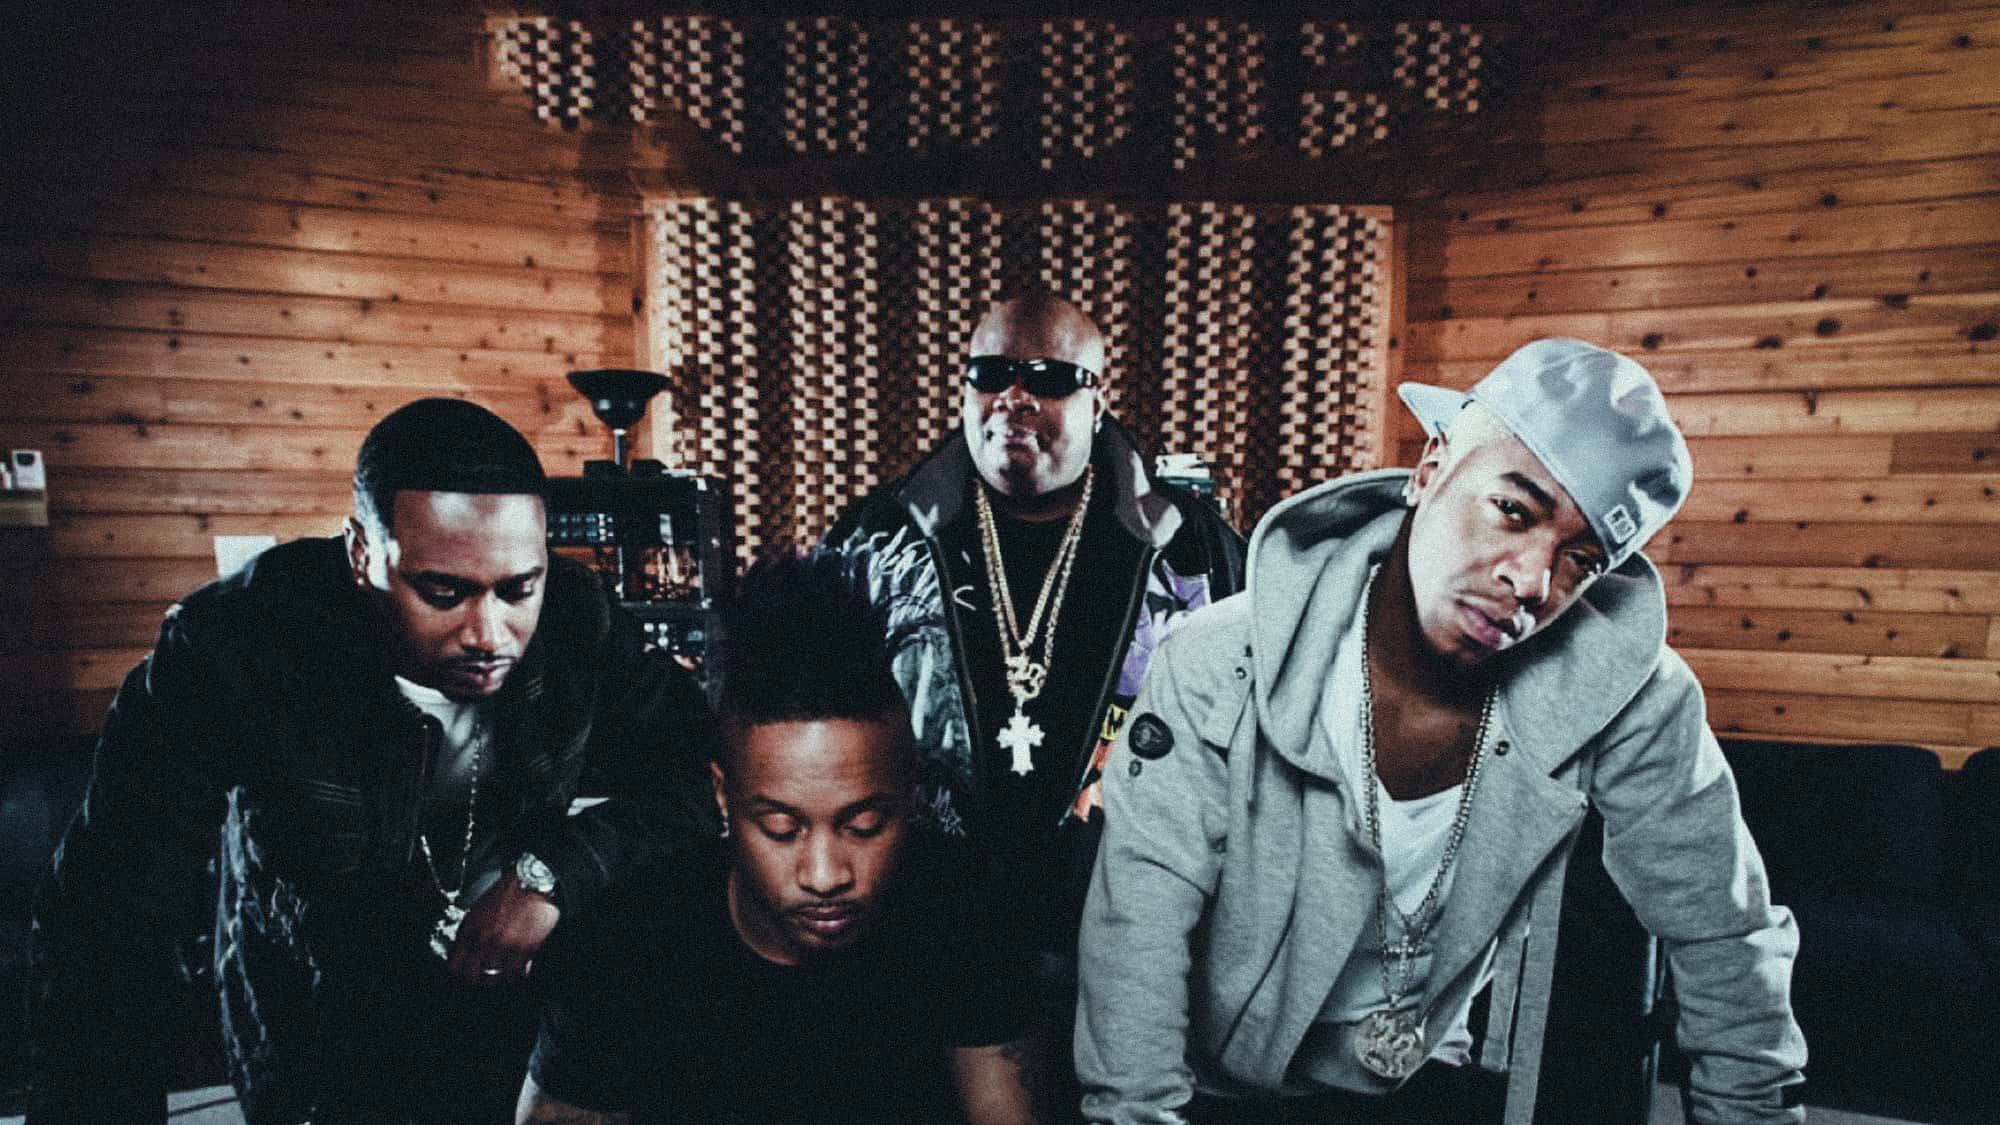 The R&B group Dru Hill challenging ANYBODY to a Verzuz battle although the focus is on Jodeci, 112, Boyz II Men & Jagged Edge.